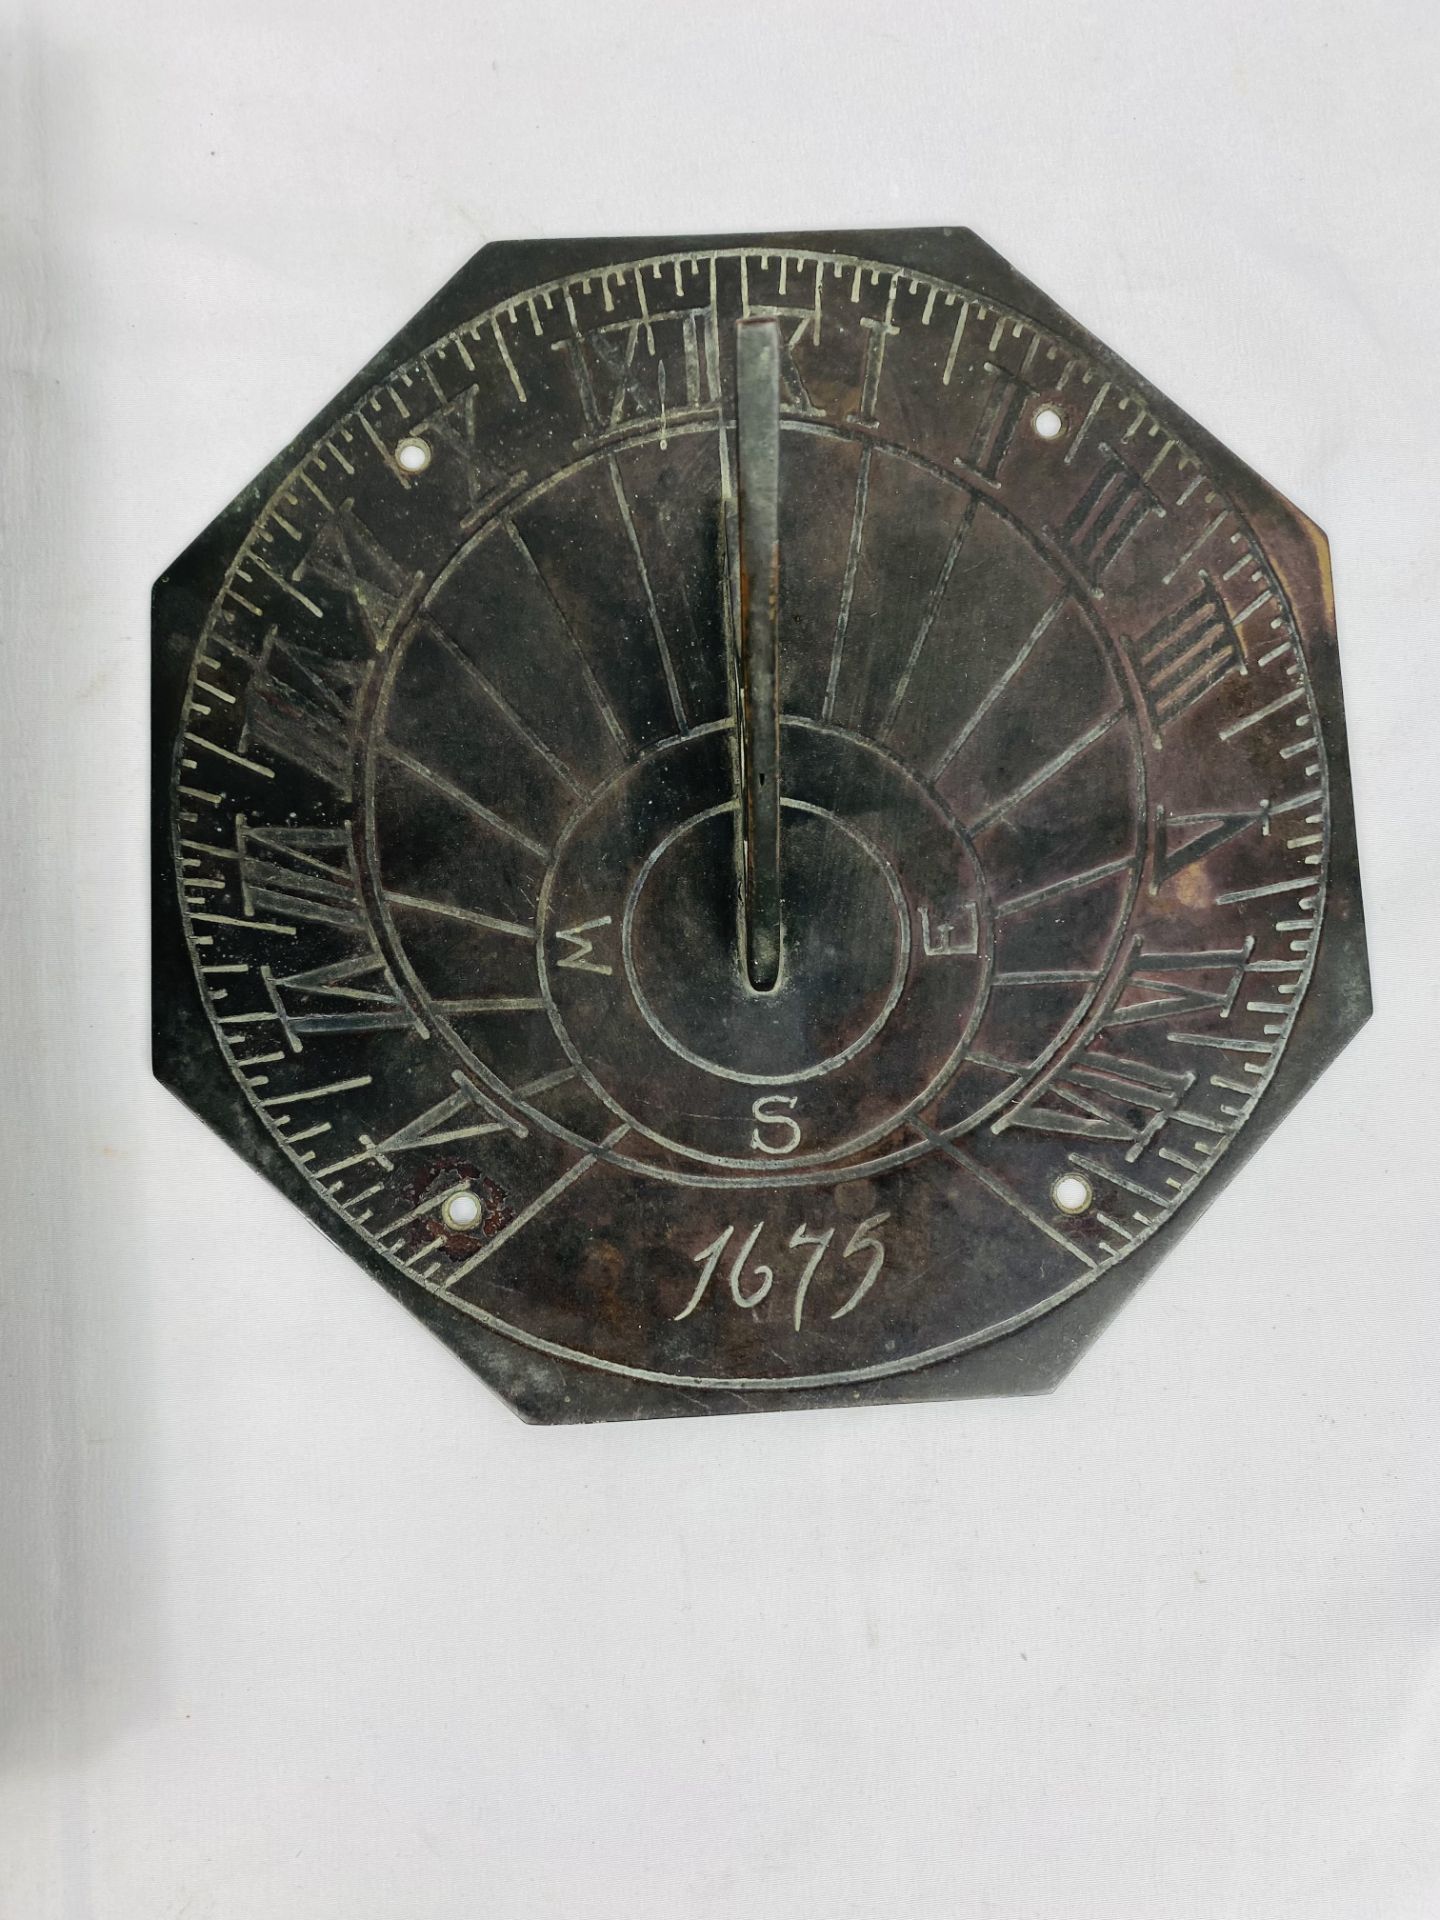 Salter's spring balance together with a brass sundial - Image 3 of 3